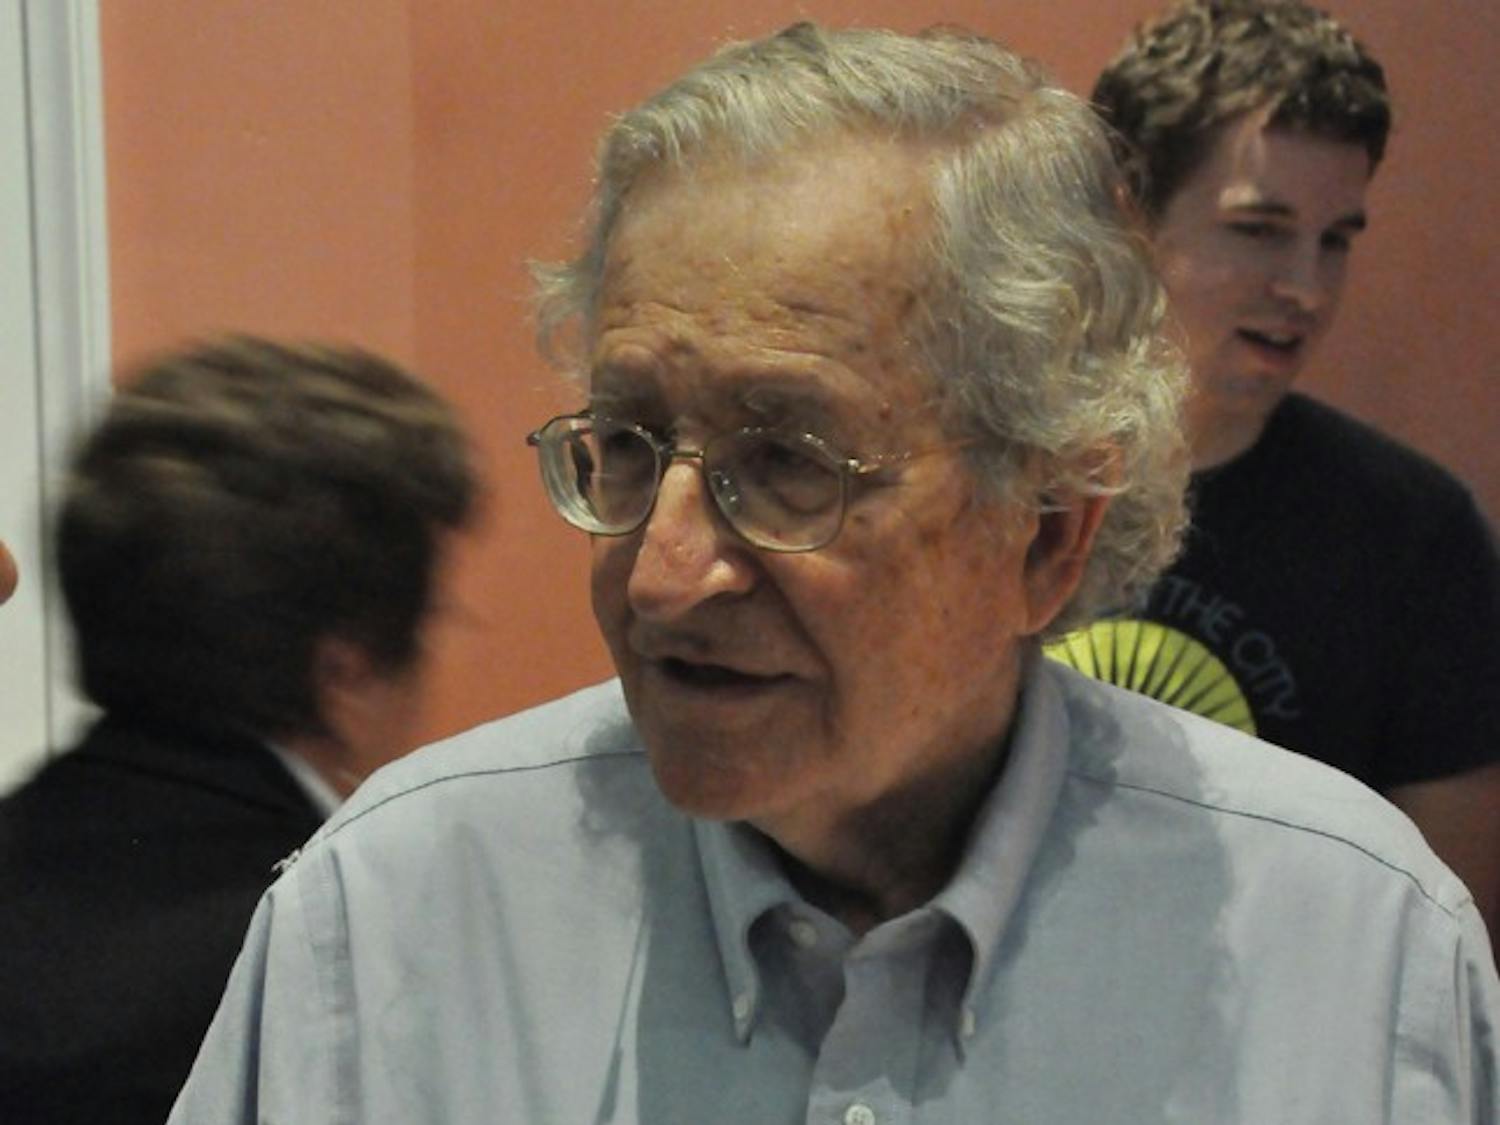 Noam Chomsky answers questions after his presentation Thursday afternoon at Gerrard Hall.  He spoke about environmental ethics.